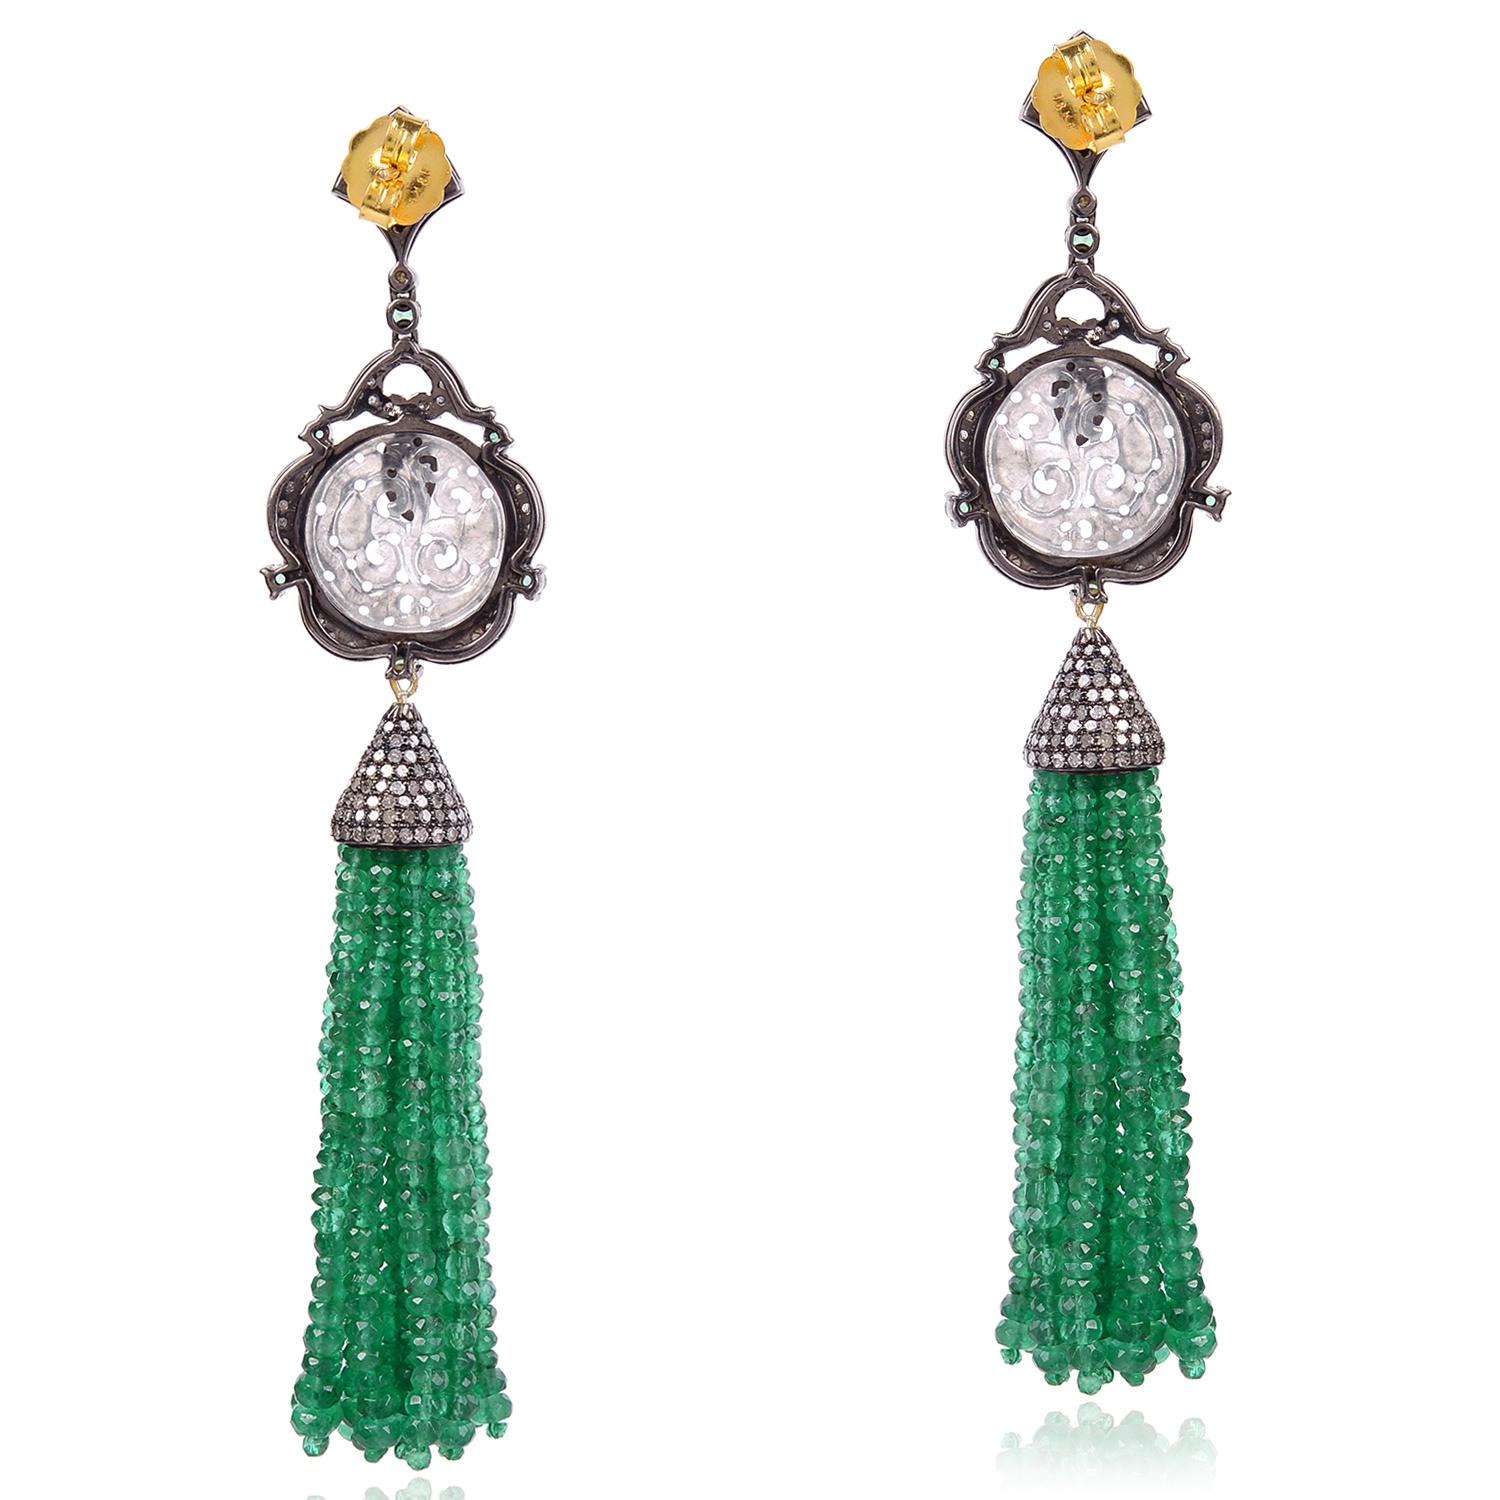 Designer hand Carved Grey Jade, Emerald and Diamond Tassel Dangling Earring in silver and gold is one of a kind.

 Closure: Push Post

18kt Gold: 2.34gms
Diamond:3.11cts
Silver:10.9gms
Emerald:92.60cts
Jade:9.40cts
